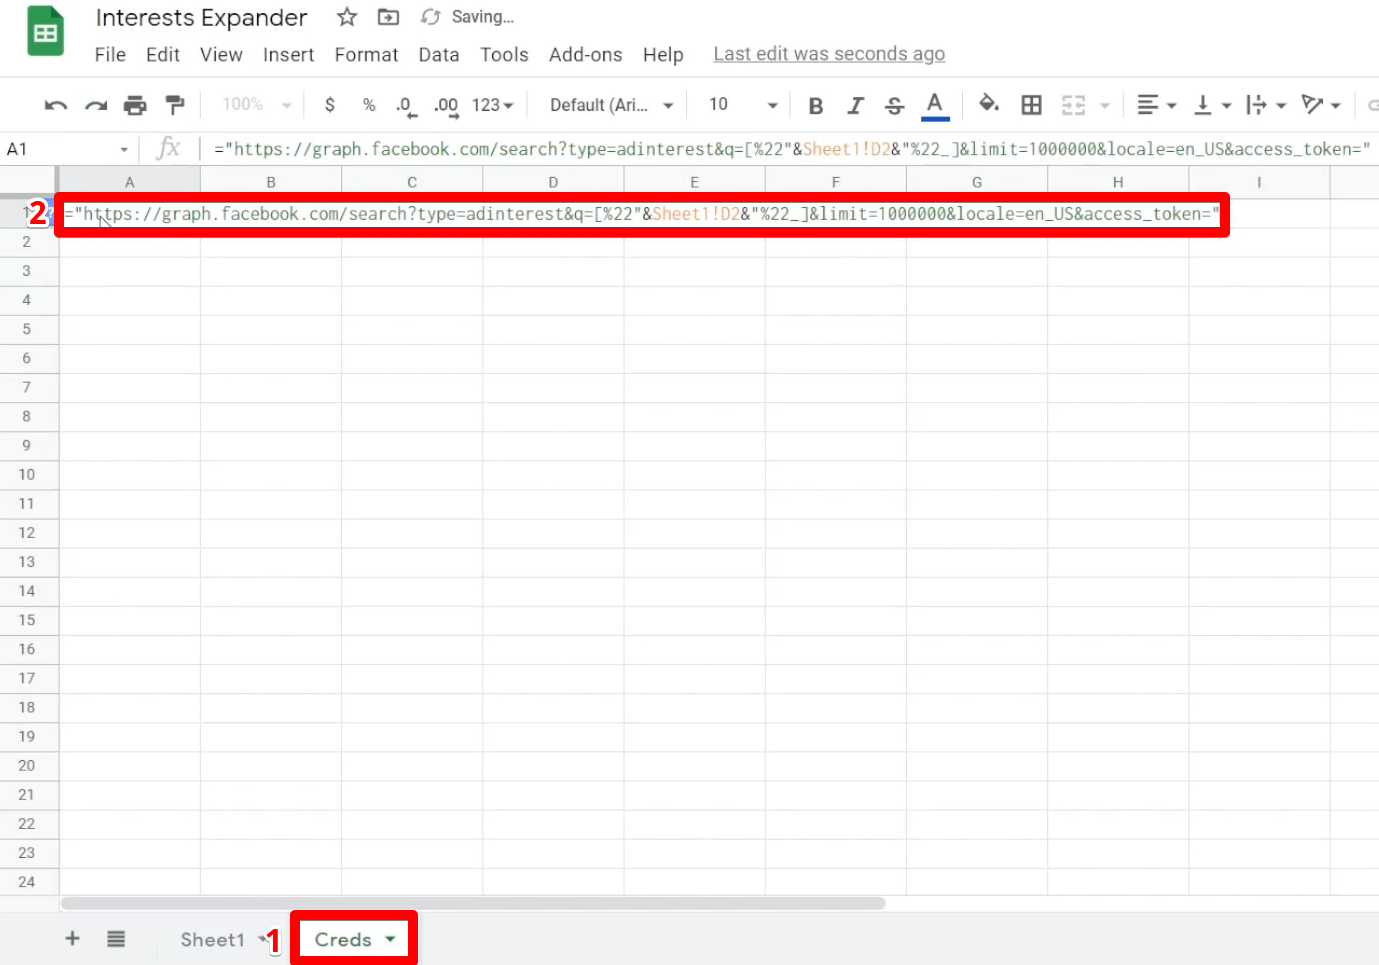 URL in Google Sheets that we were using in the tab, but with an added variable and missing the access token